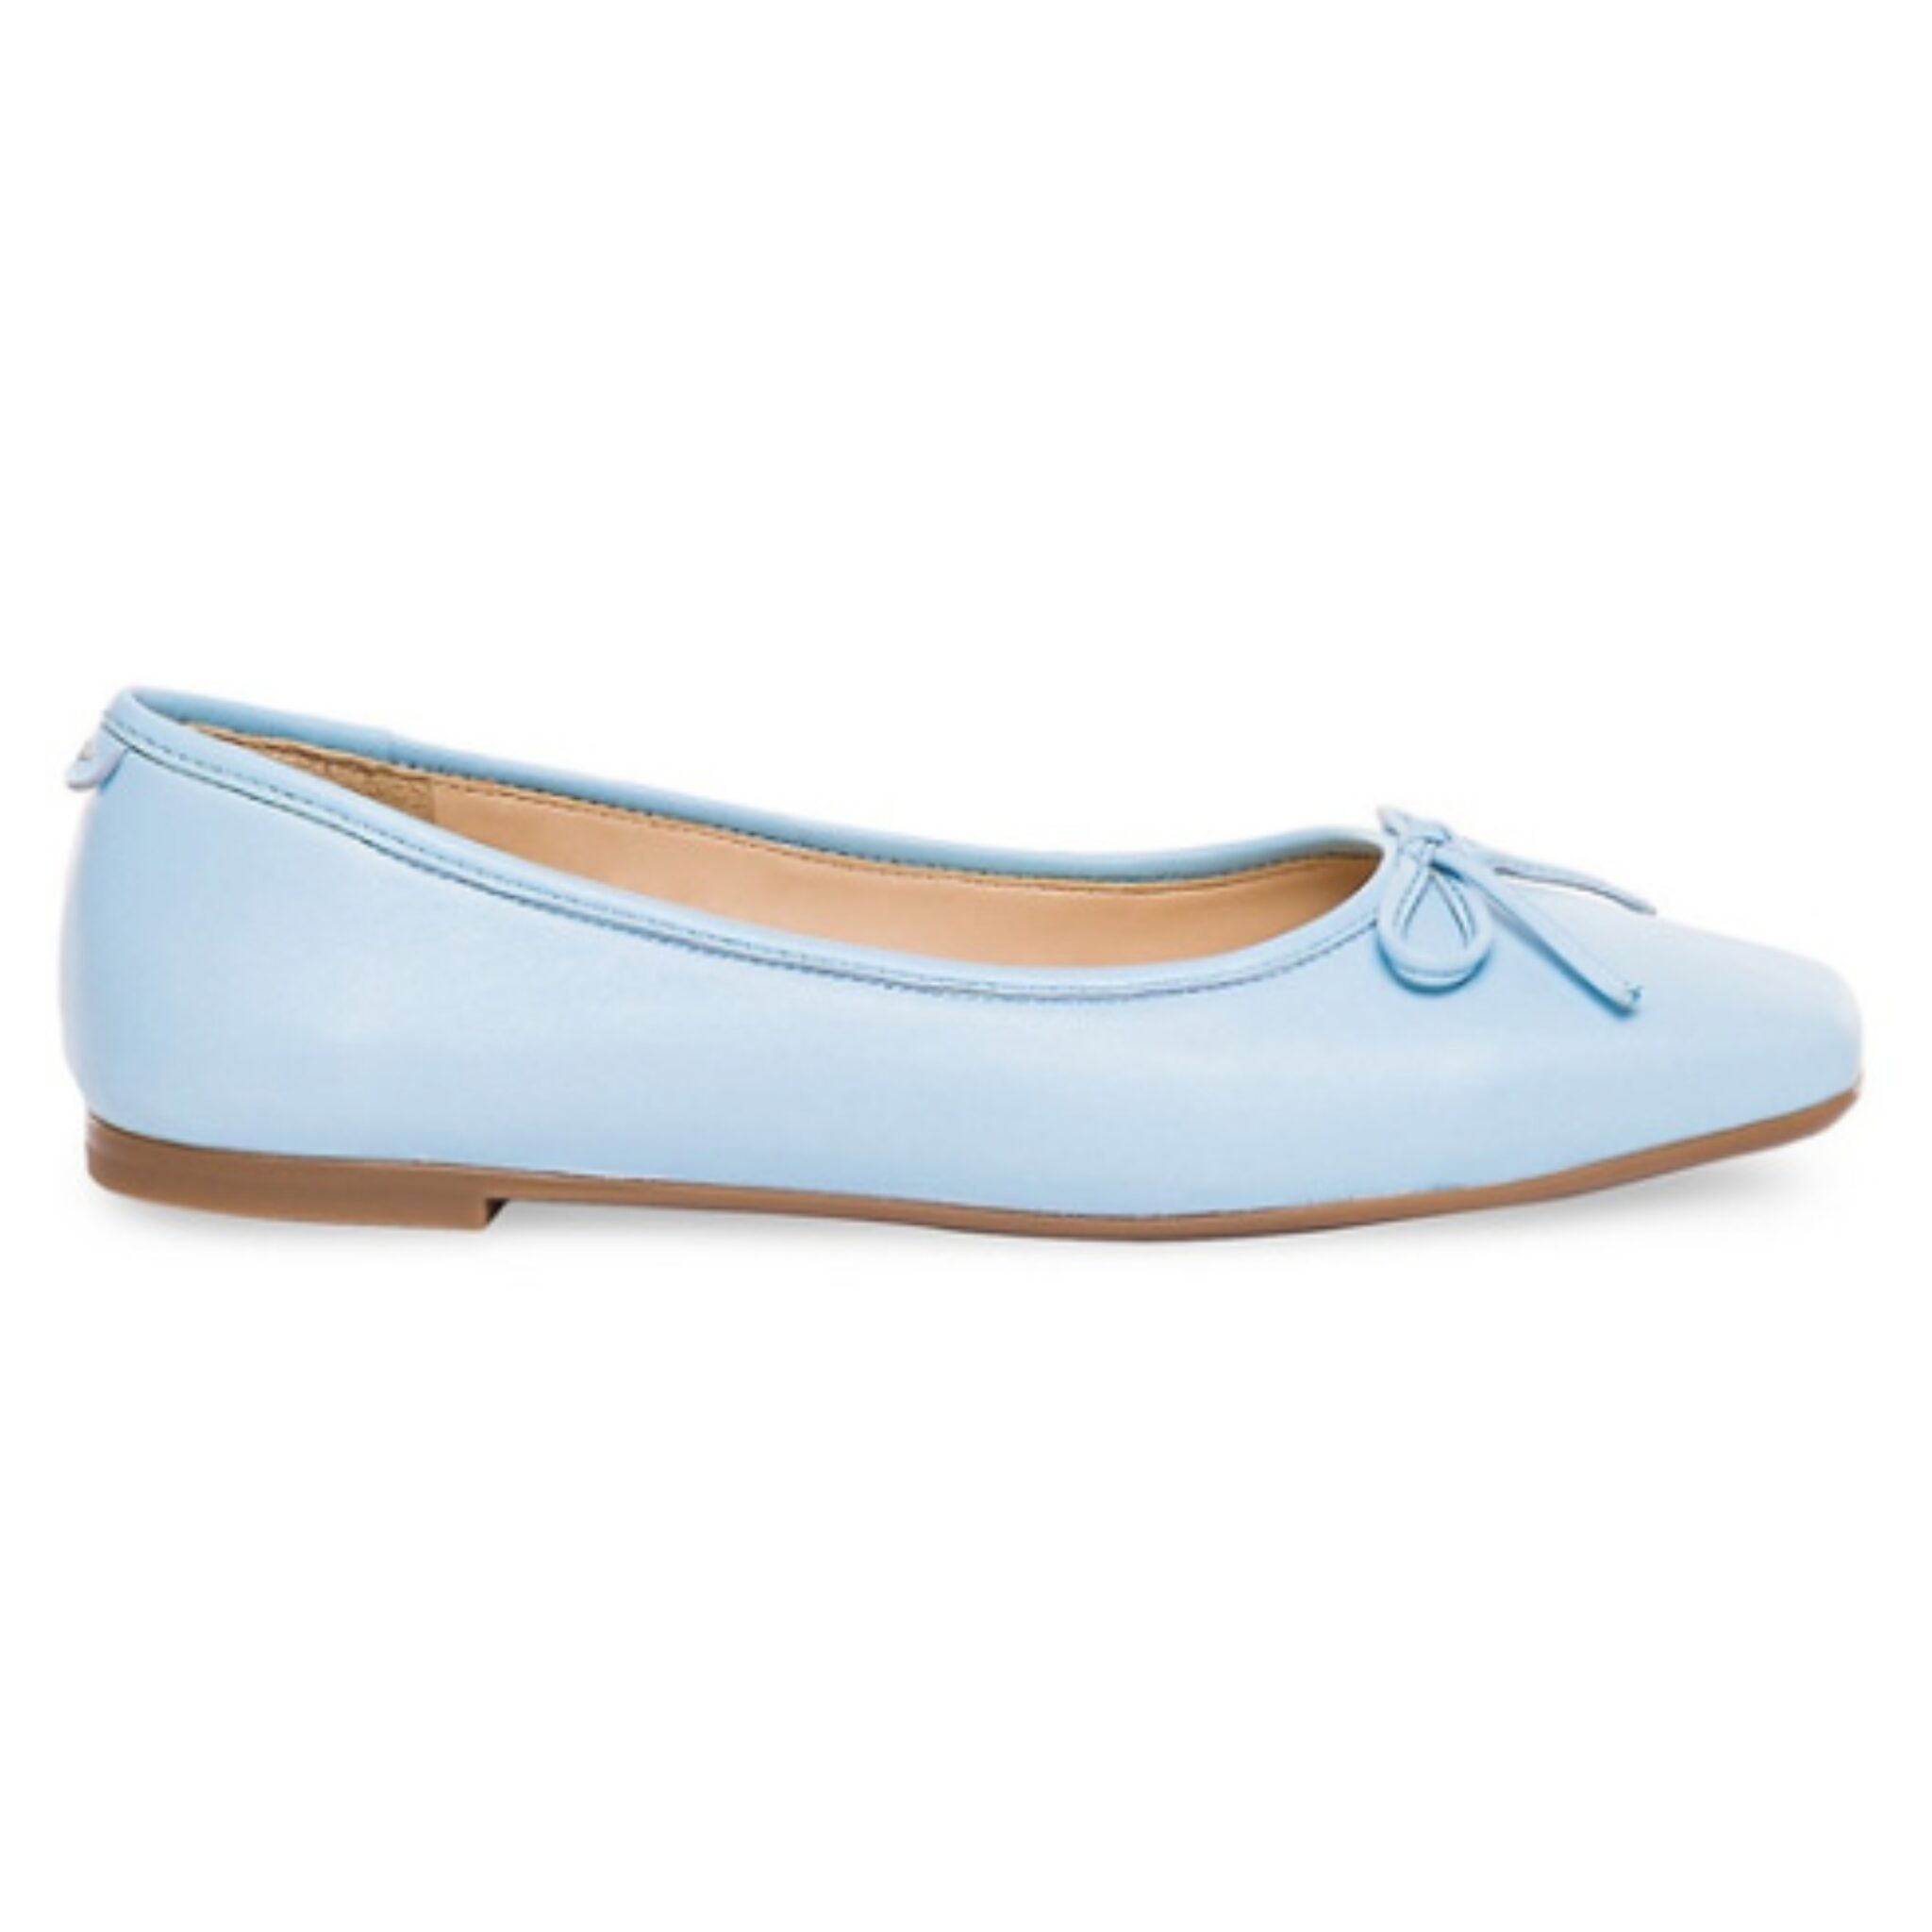 Blue ballet flats to wear with leather pants.